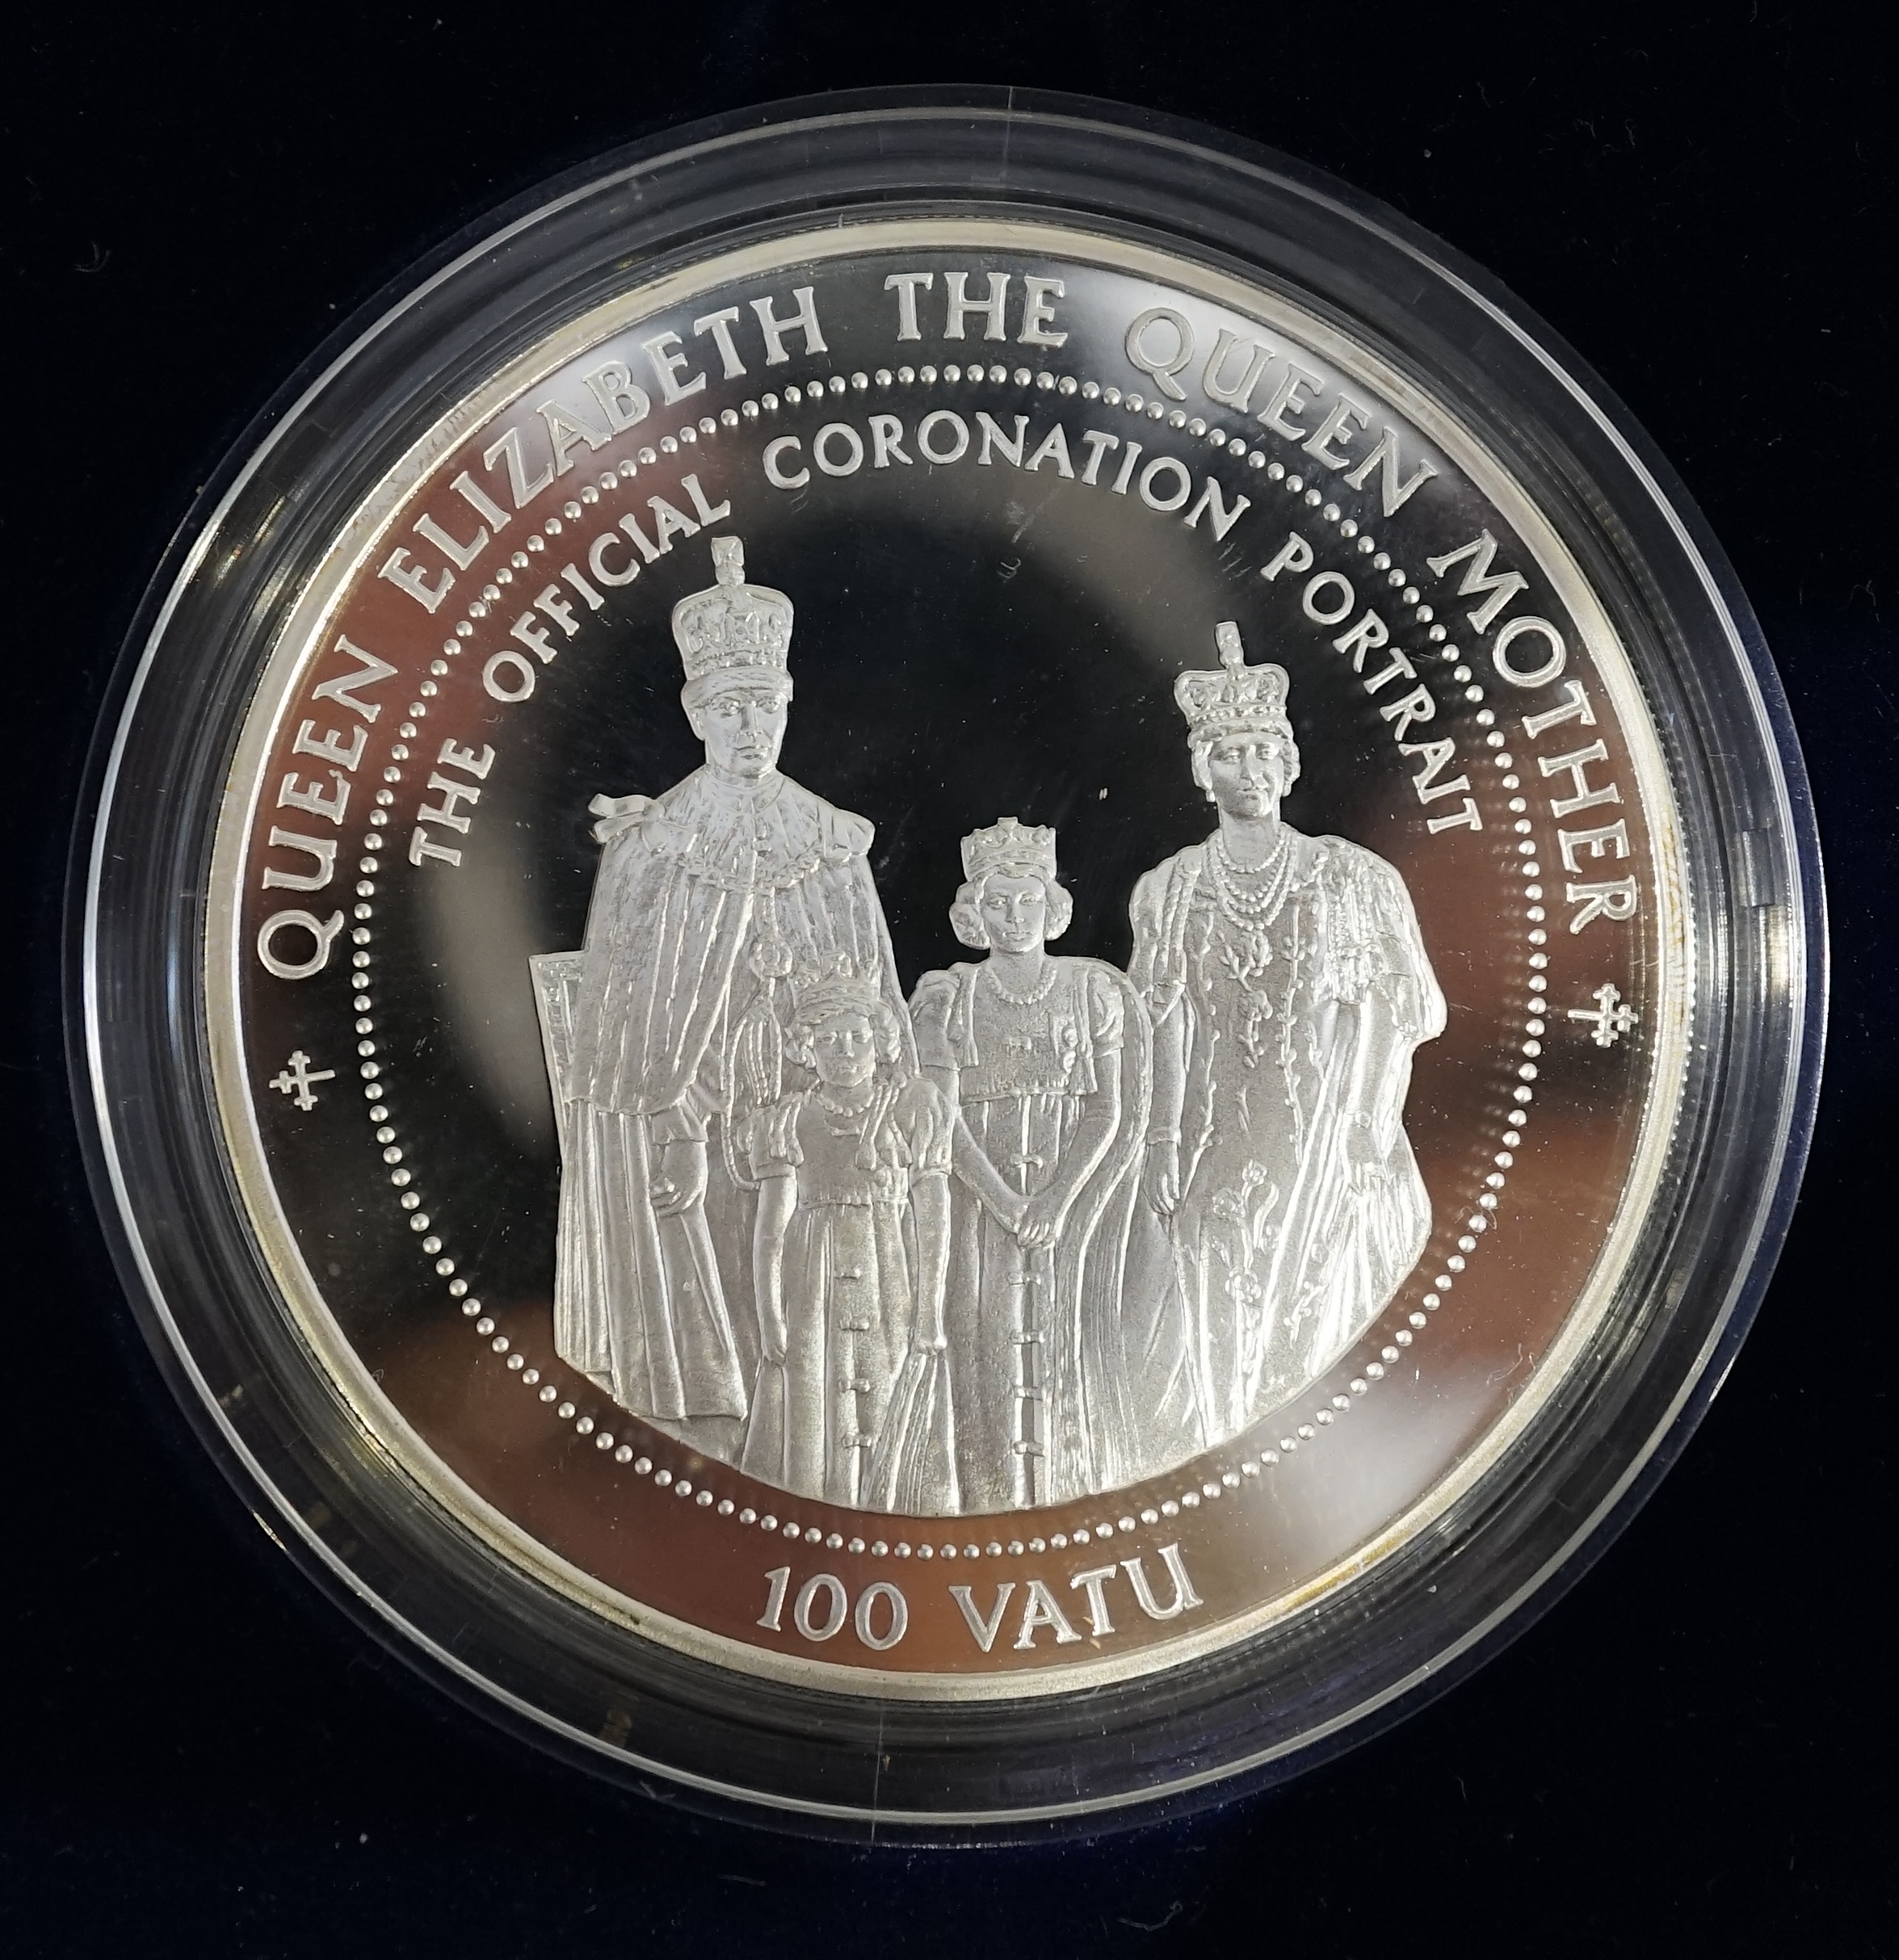 British and Commonwealth commemorative coins, MDM Crown collection HM Queen Elizabeth the Queen Mother, comprising Vanuatu proof silver 100 vatu coin, 155.5g, and four proof silver coins ranging from 15.98 to 31. 47g and